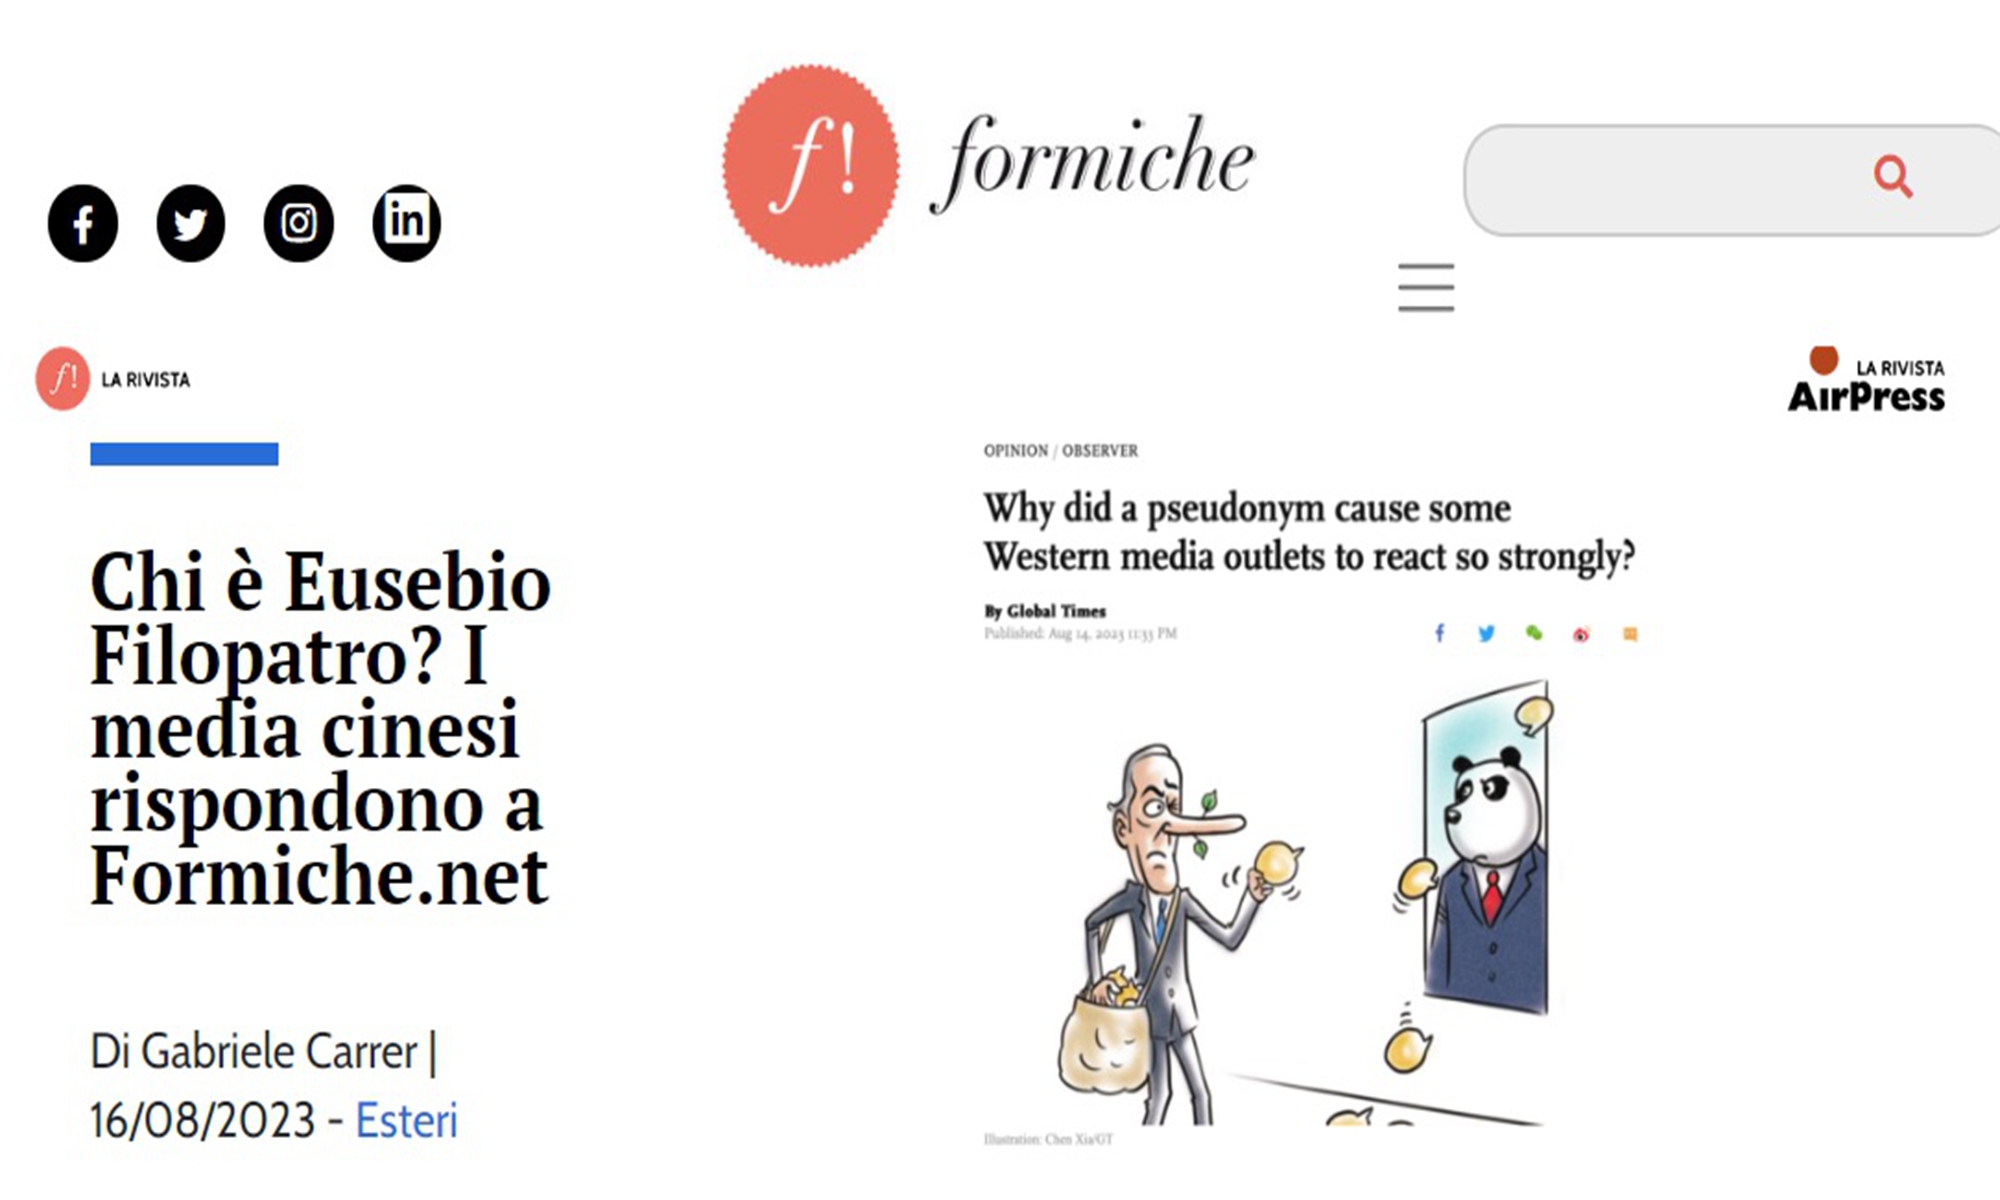 Italian media Le Formiche publishes a response to GT article to clarify its doubts and questions on a piece by Eusebio Filopatro (pseudonym). Photo: Screenshot of Le Formechinet